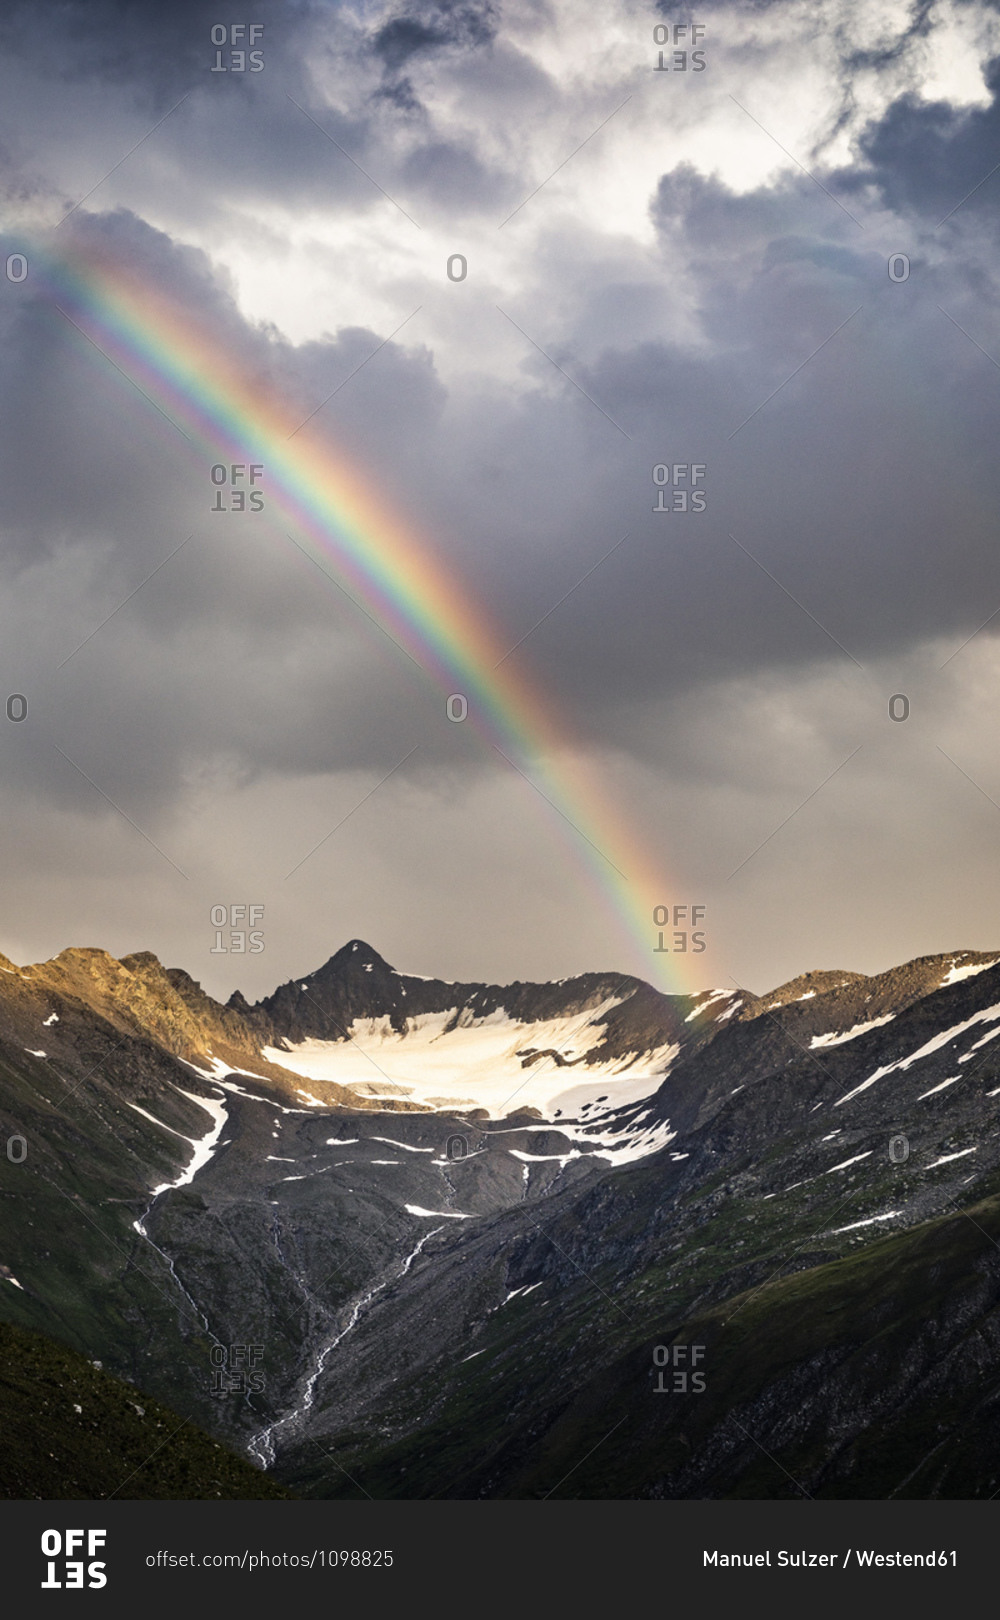 Rainbow in mountain landscape overview